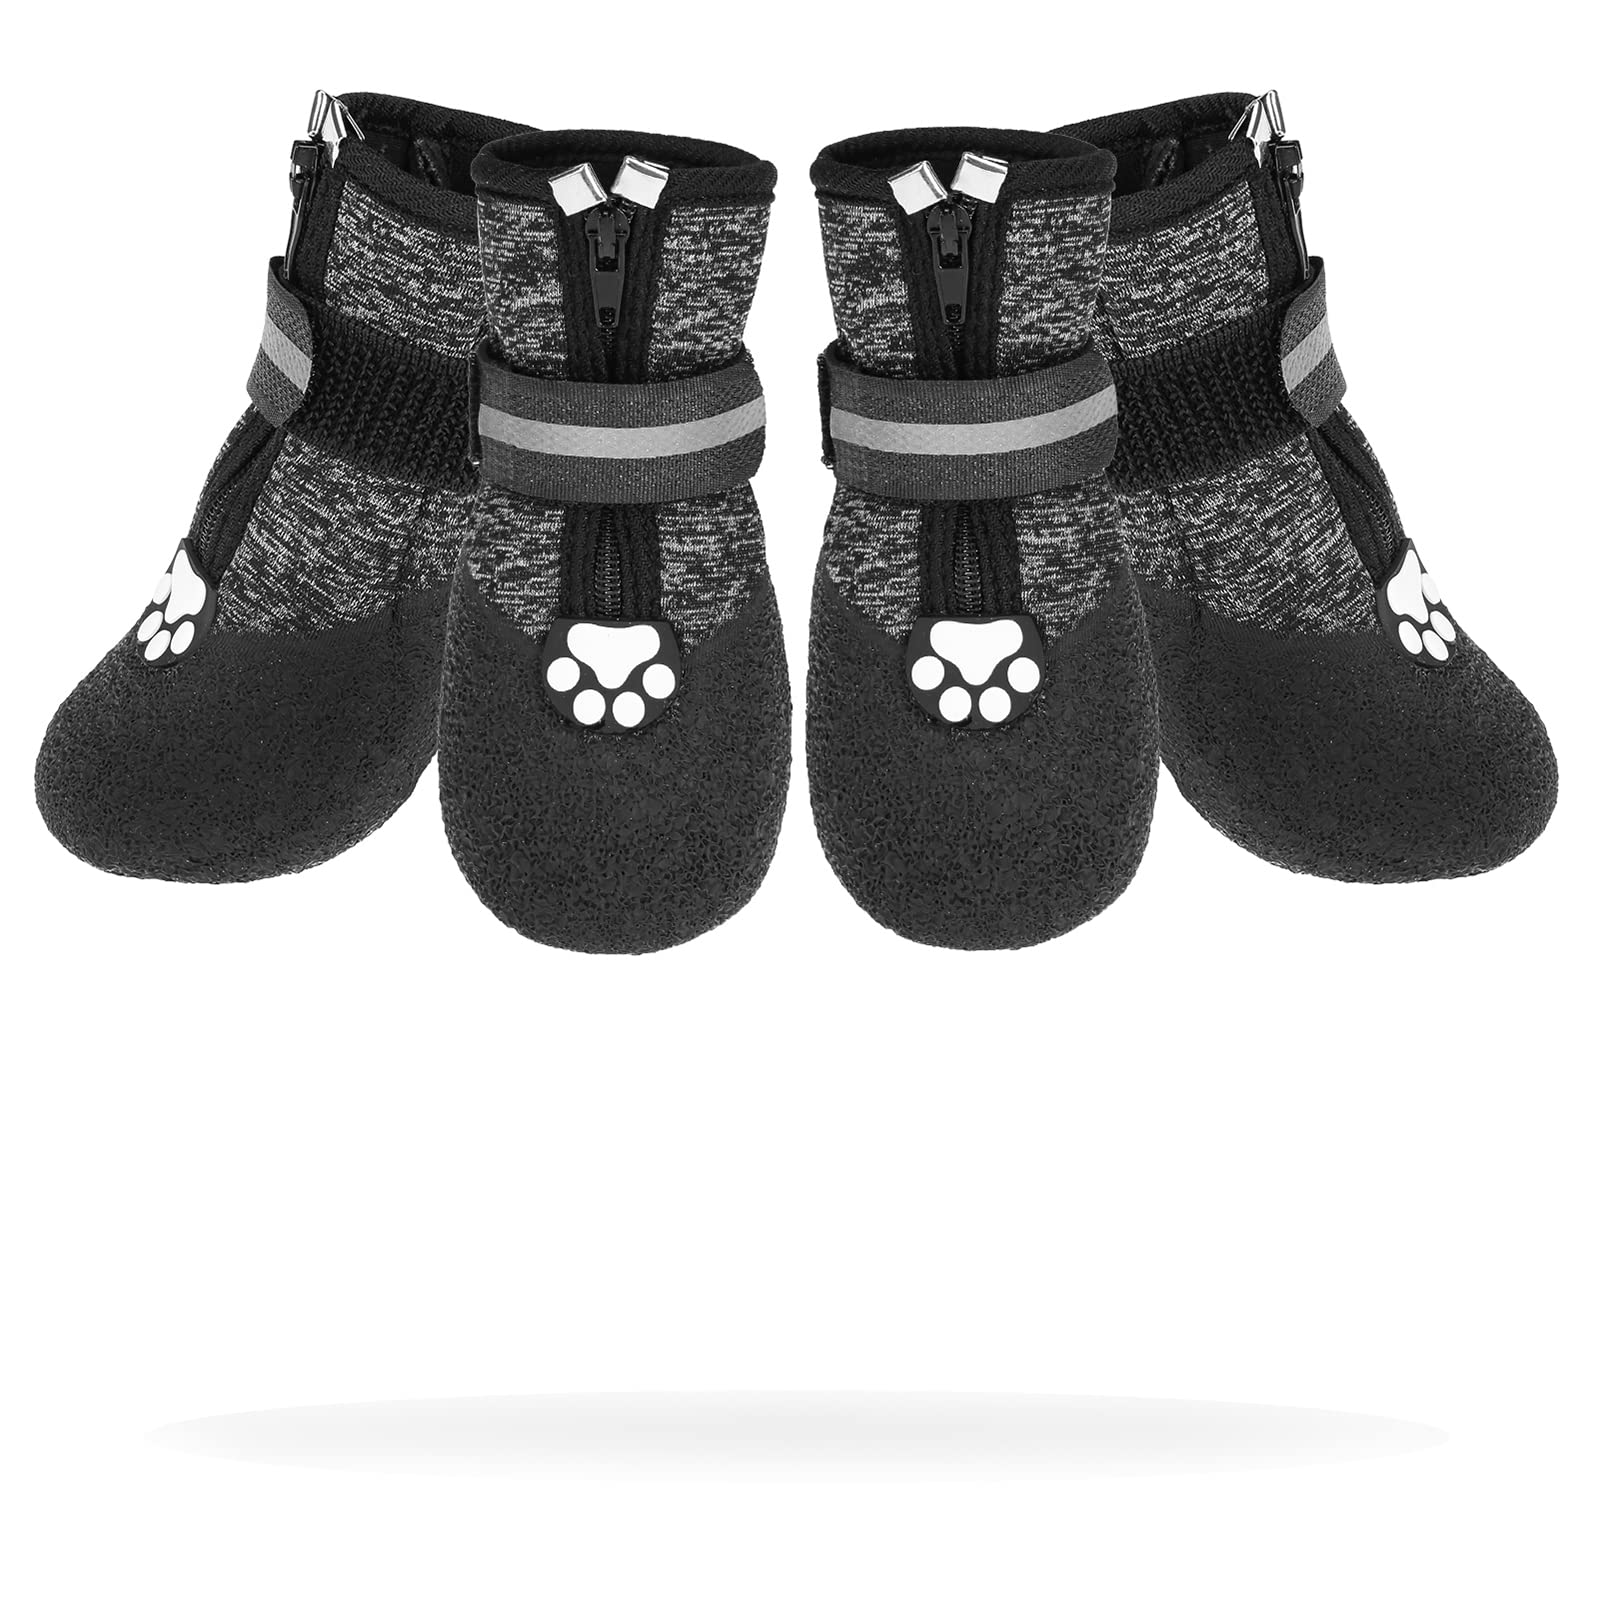 11 Best Dog Socks to Protect Paws & Floors: Cutest Styles